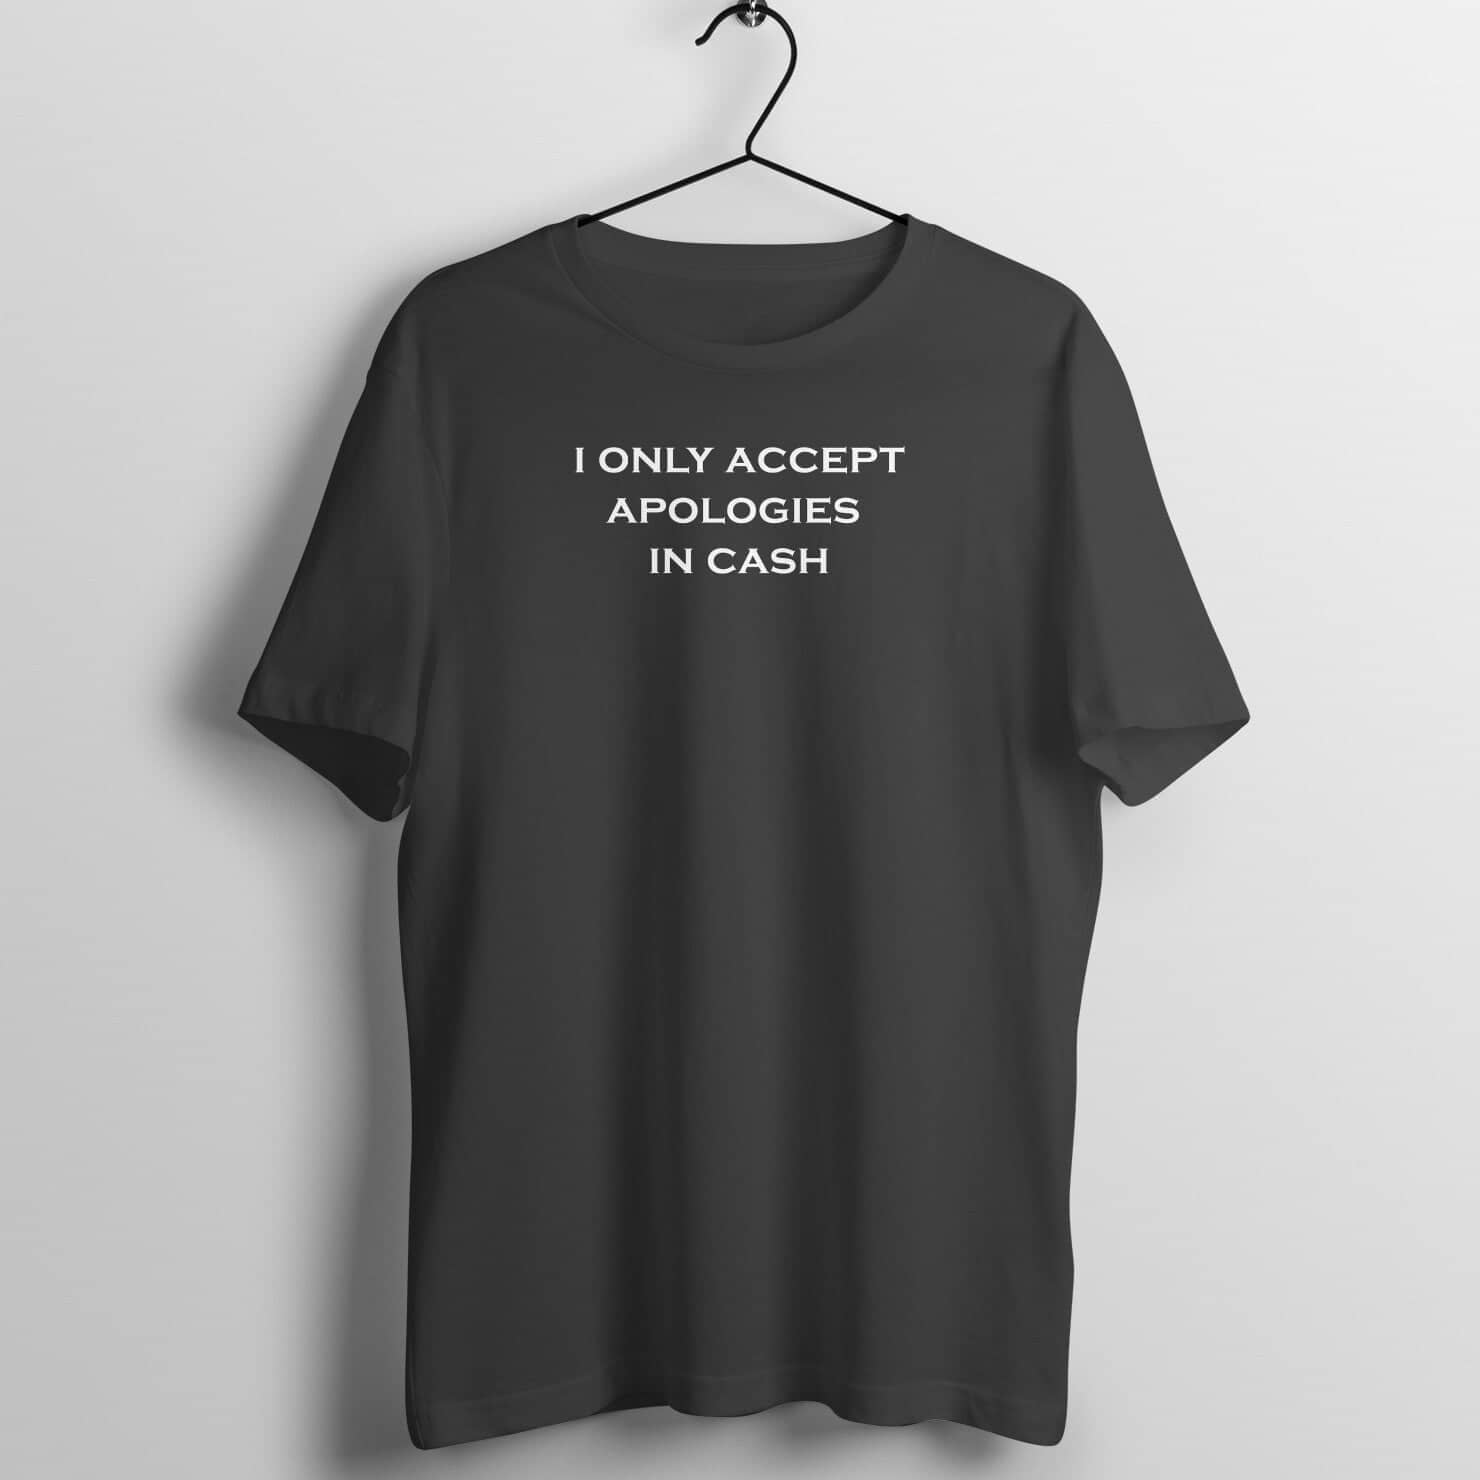 I Only Accept Apologies in Cash Funny Black T Shirt for Men and Women freeshipping - Catch My Drift India